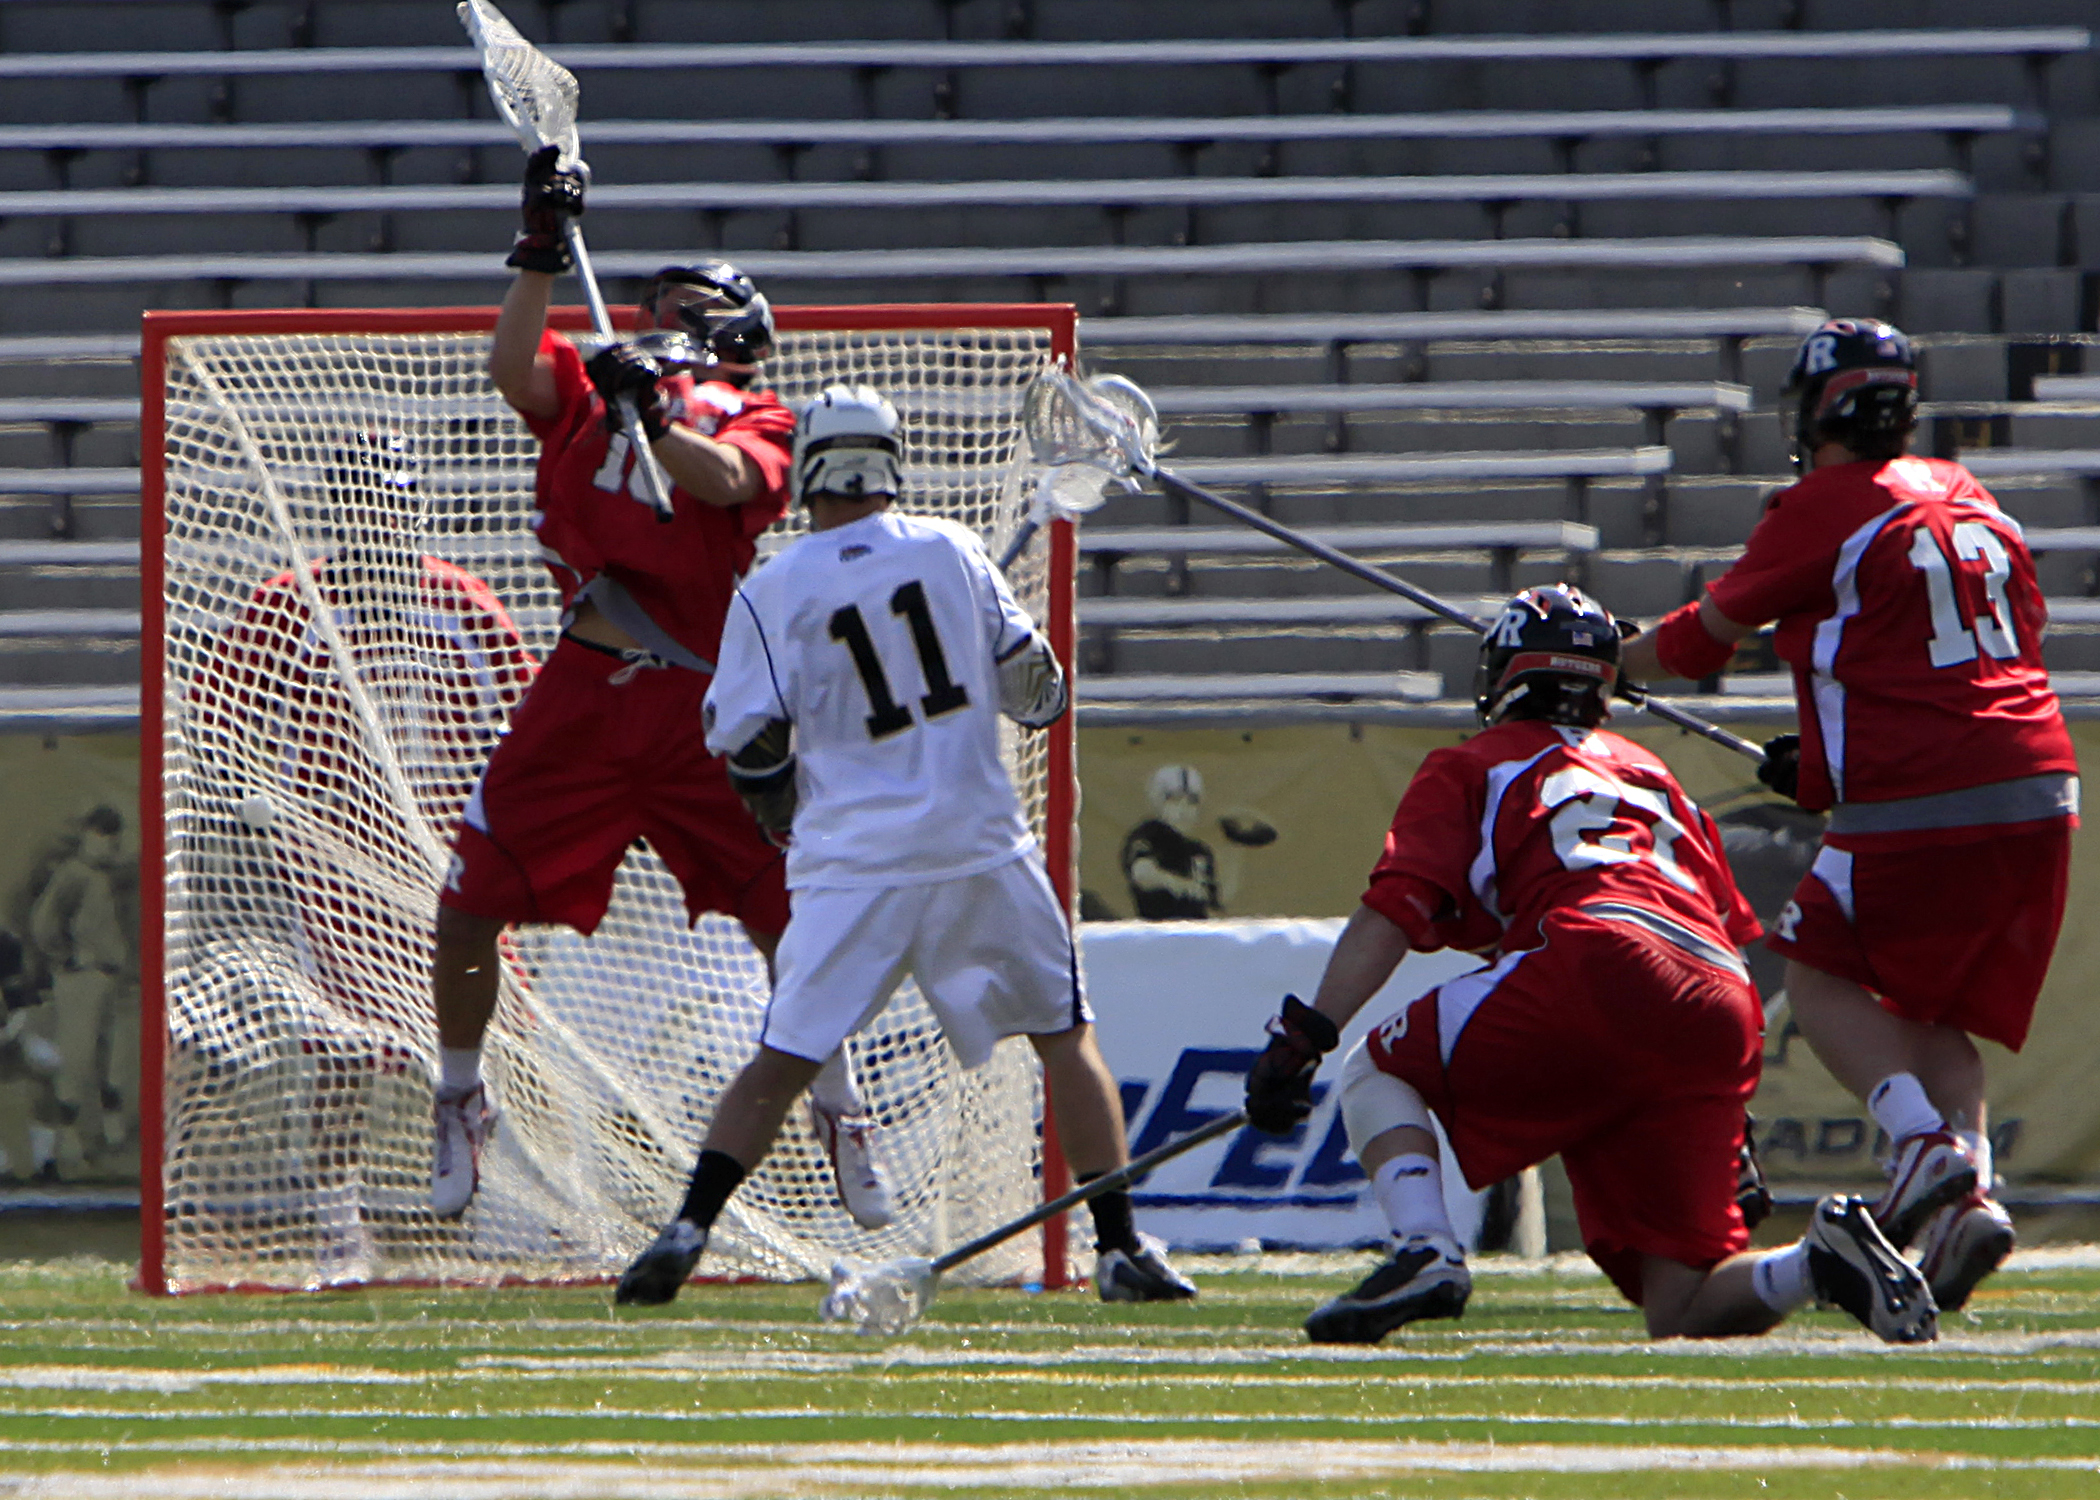 a lacrosse game with the player holding the ball in his hands